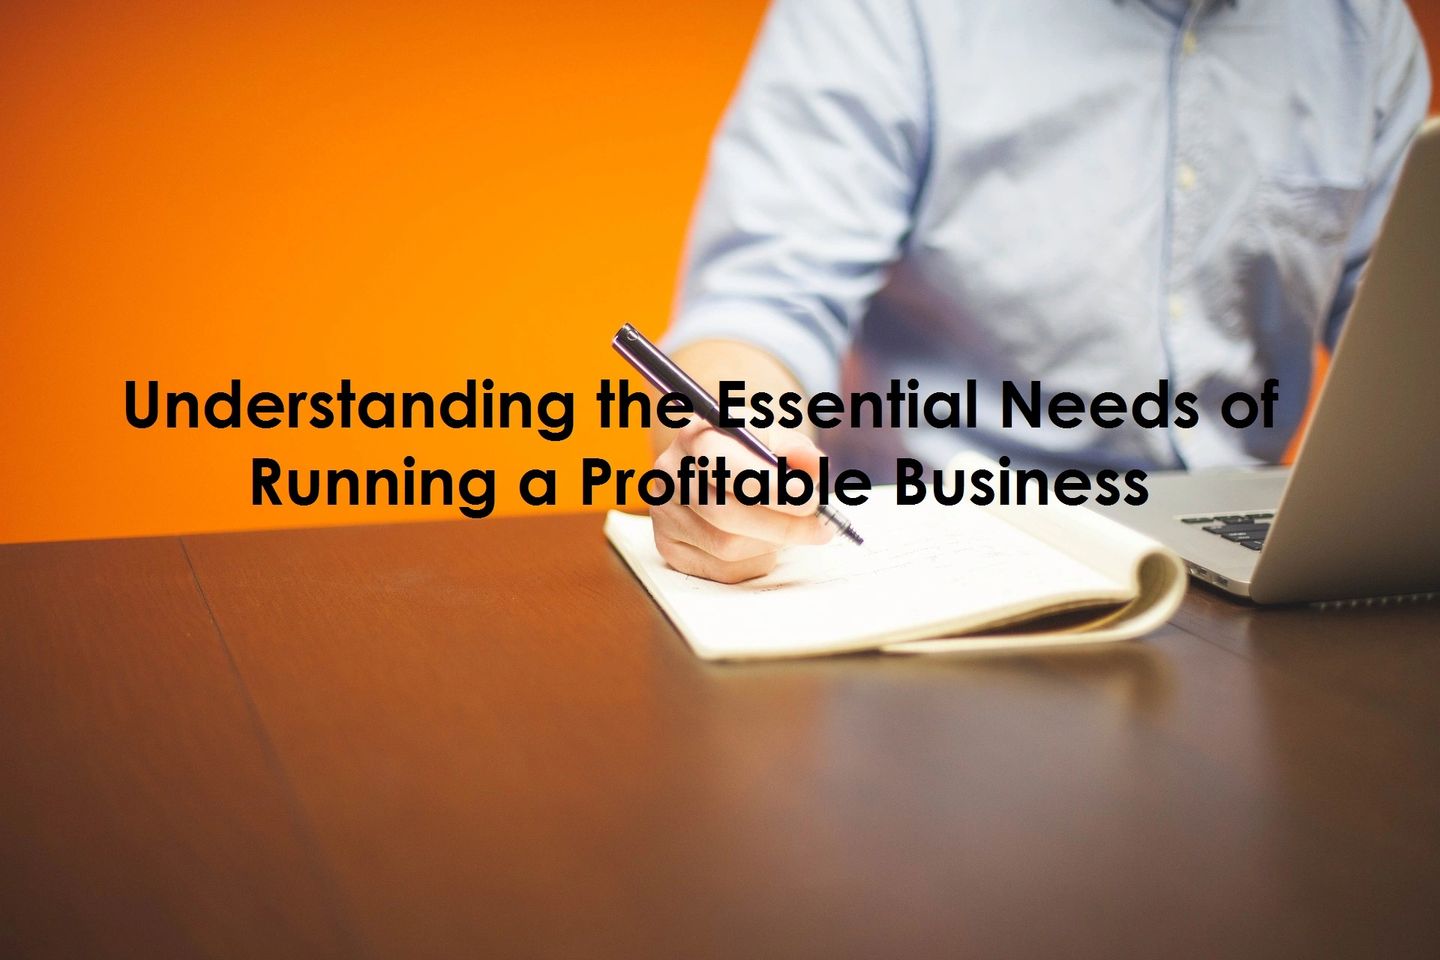 Understanding the Essential Needs of Running a Profitable Business